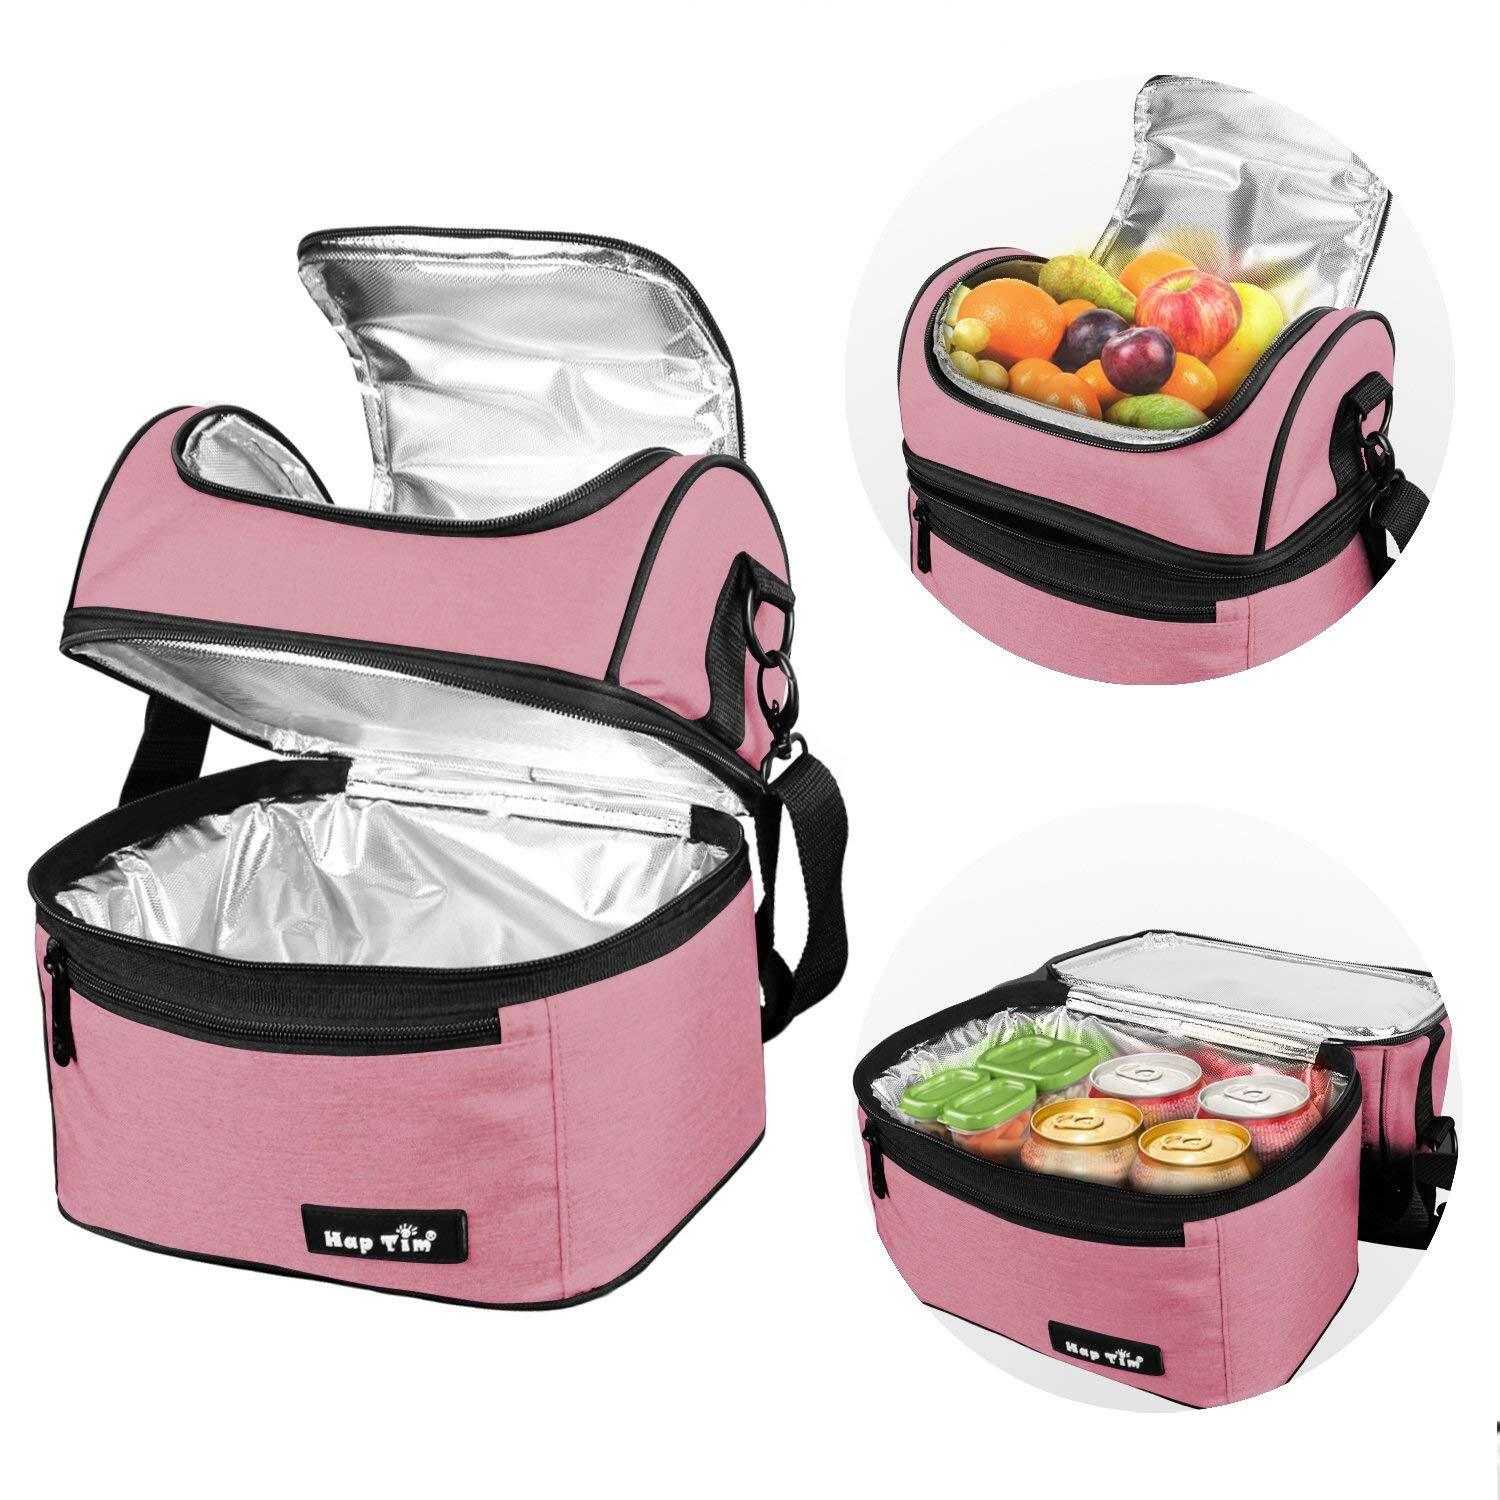 https://images.51microshop.com/1658/product/20180927/Hap_Tim_Lunch_Box_Insulated_Lunch_Bag_Large_Cooler_Tote_Bag_16040_PK__1538018295088_6.jpg